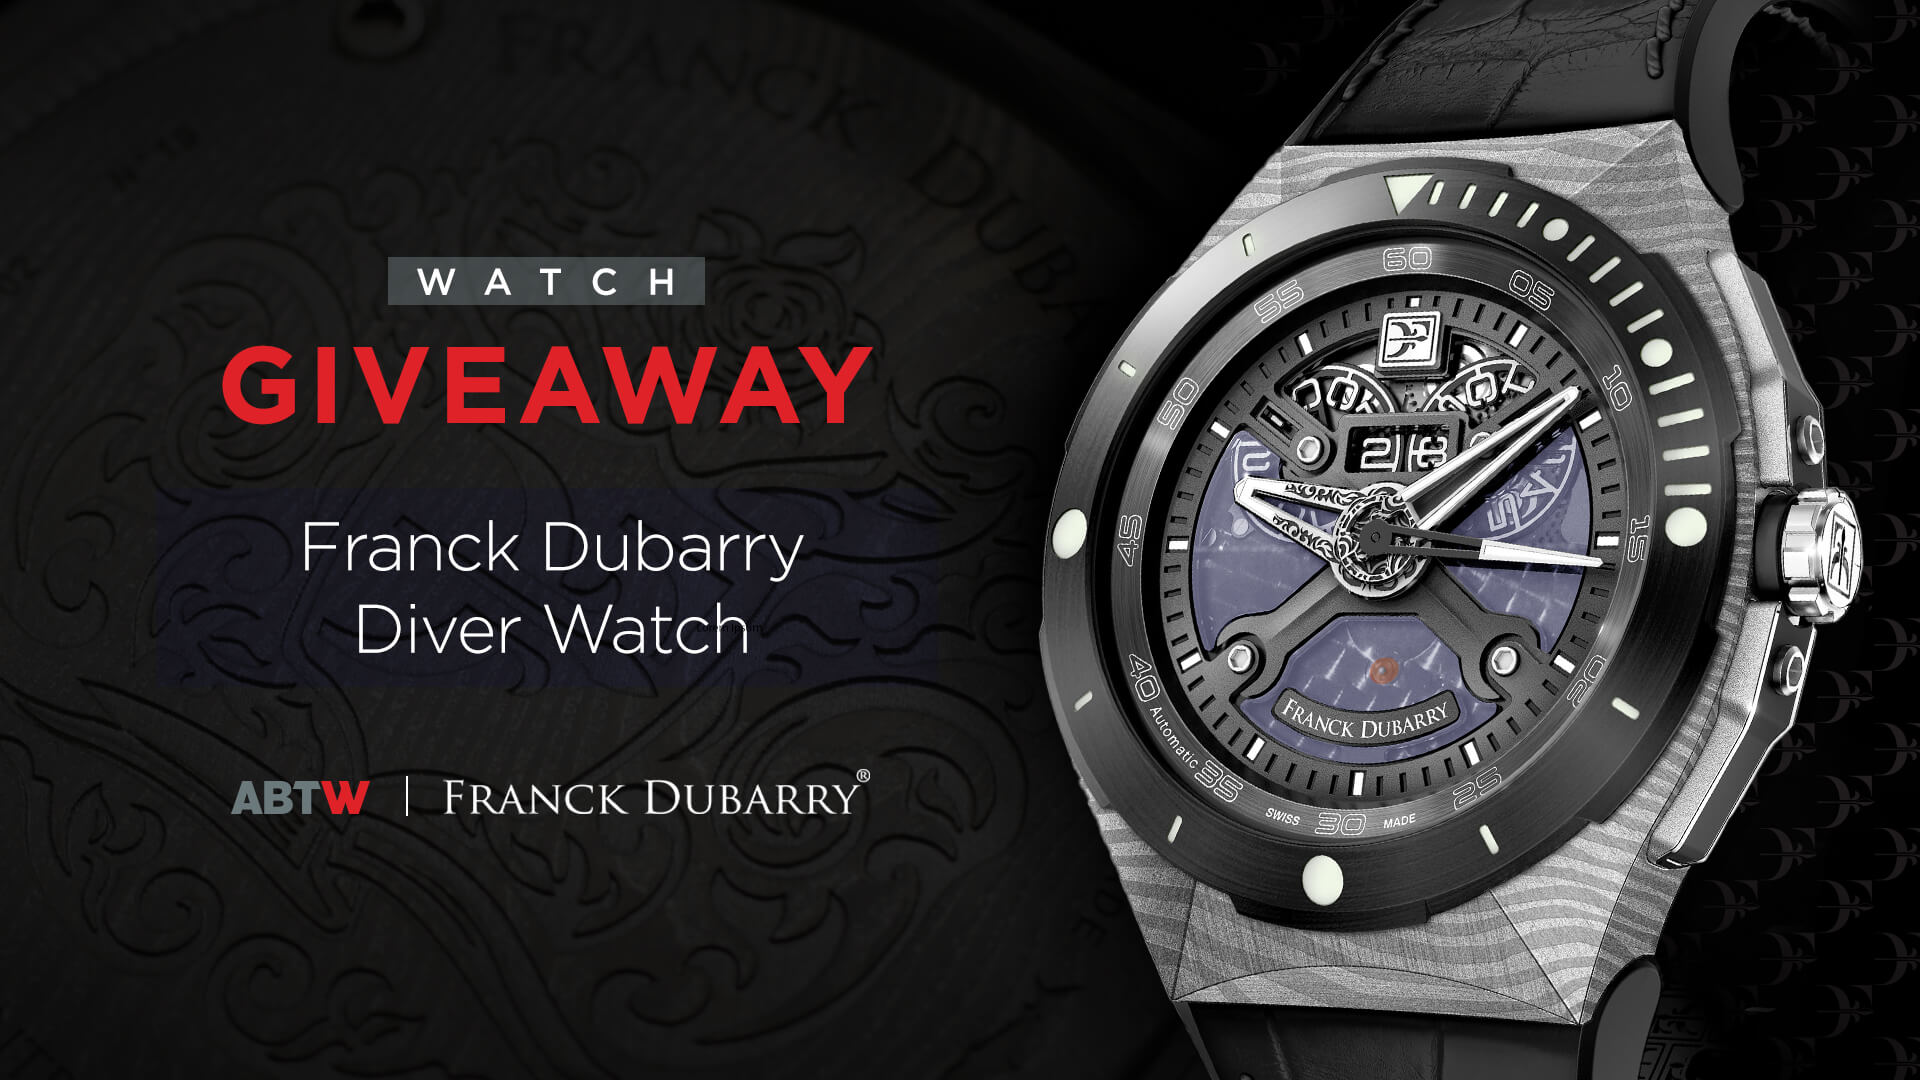 WATCH GIVEAWAY: Franck Dubarry Diver Watch